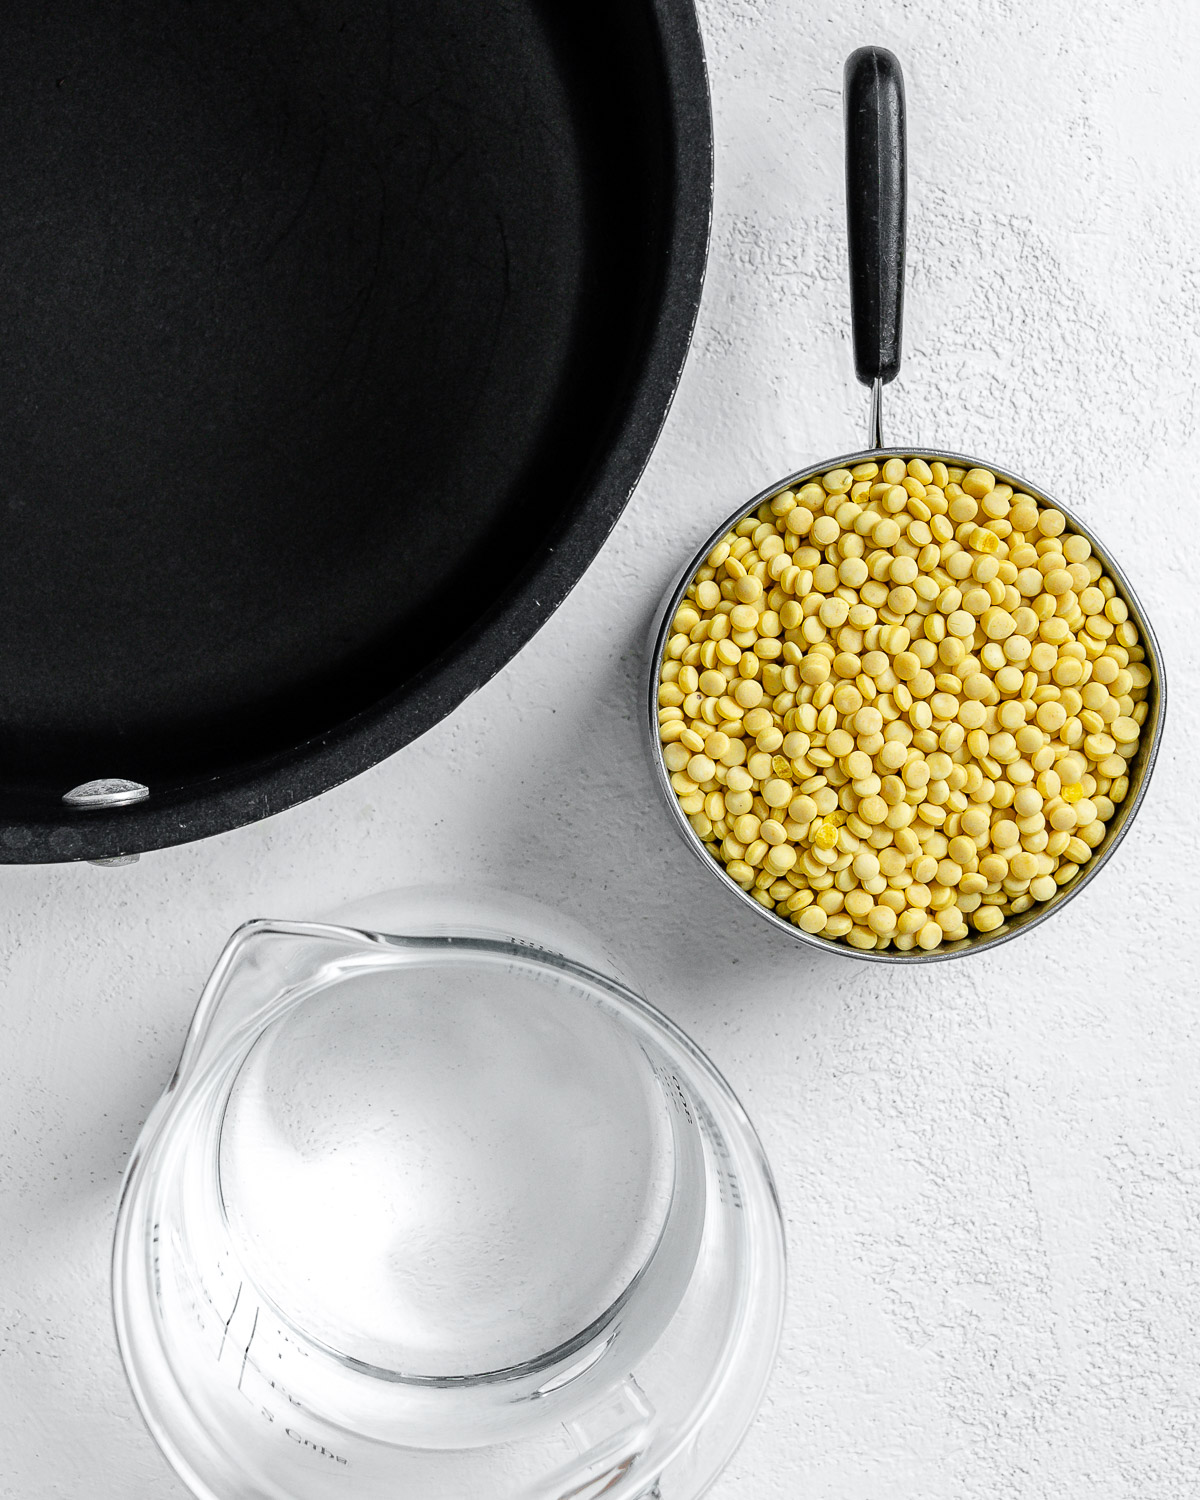 skillet alongside water and couscous against a white surface